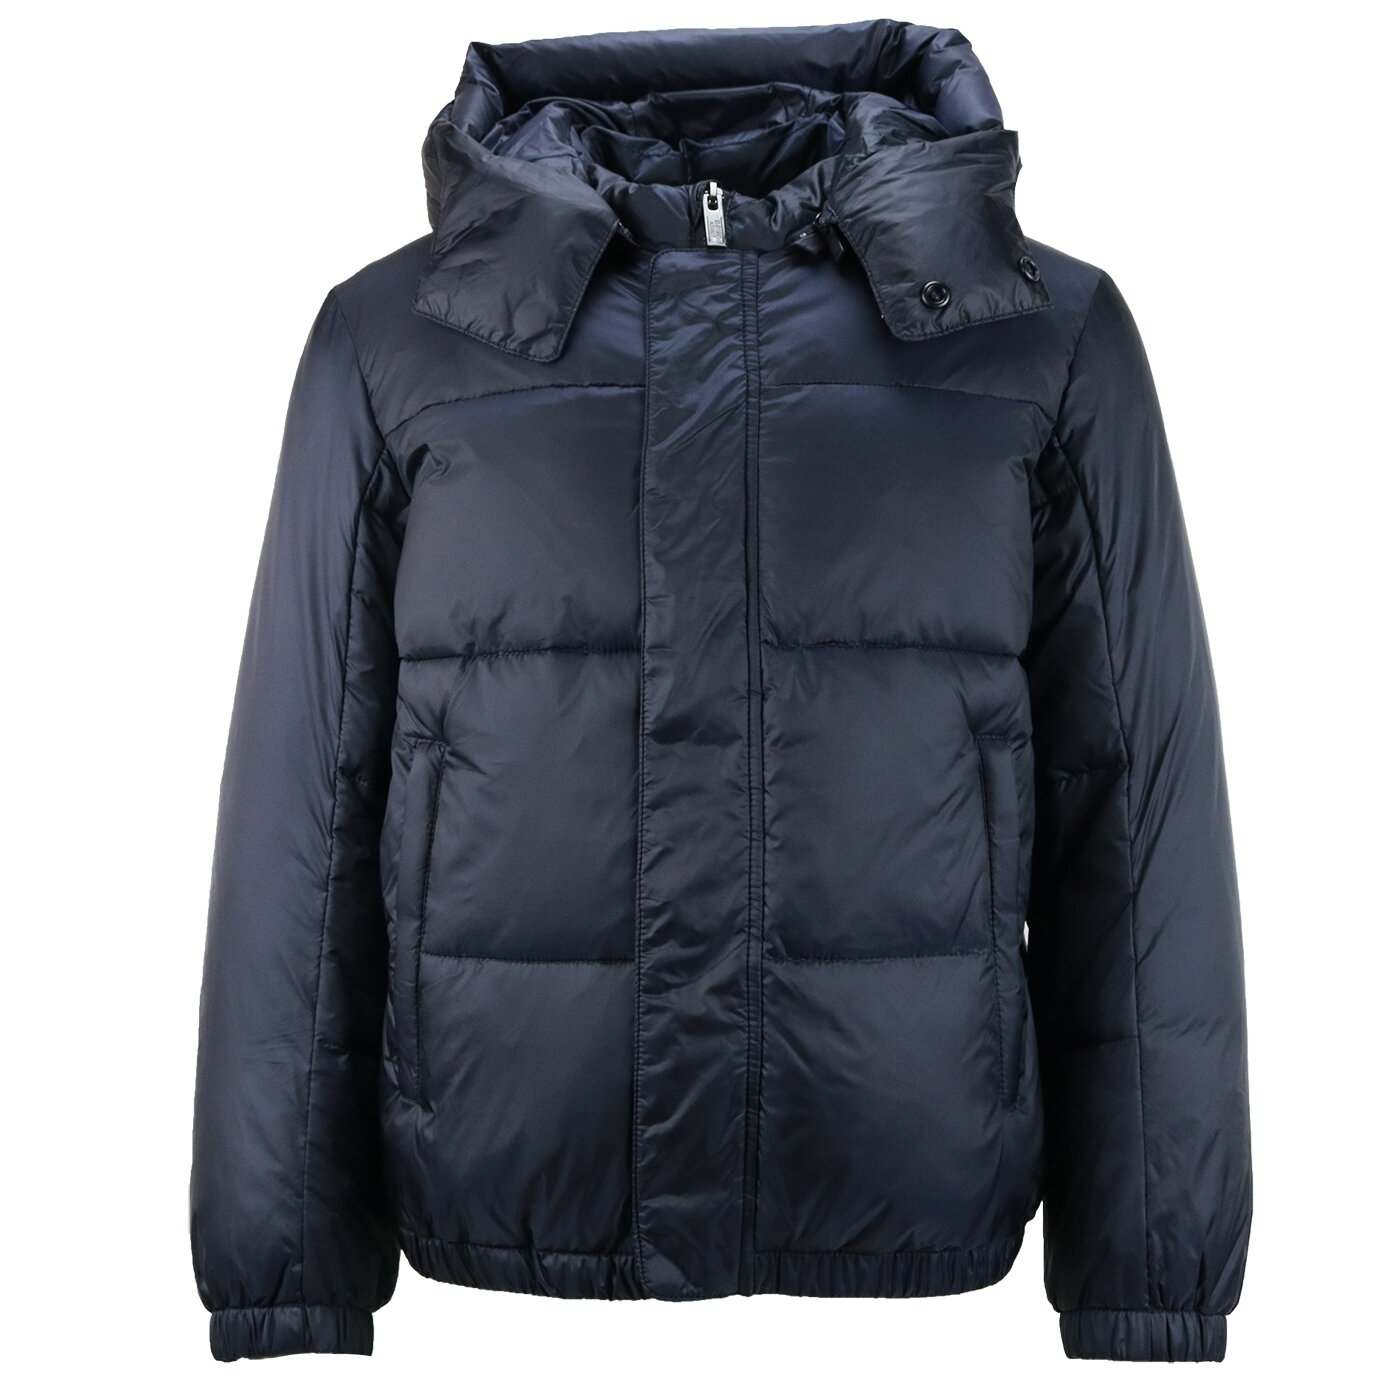 ego Definitief band armani-winter-jacket-navy-6H4BL1 - Fashion for Kids & Teens